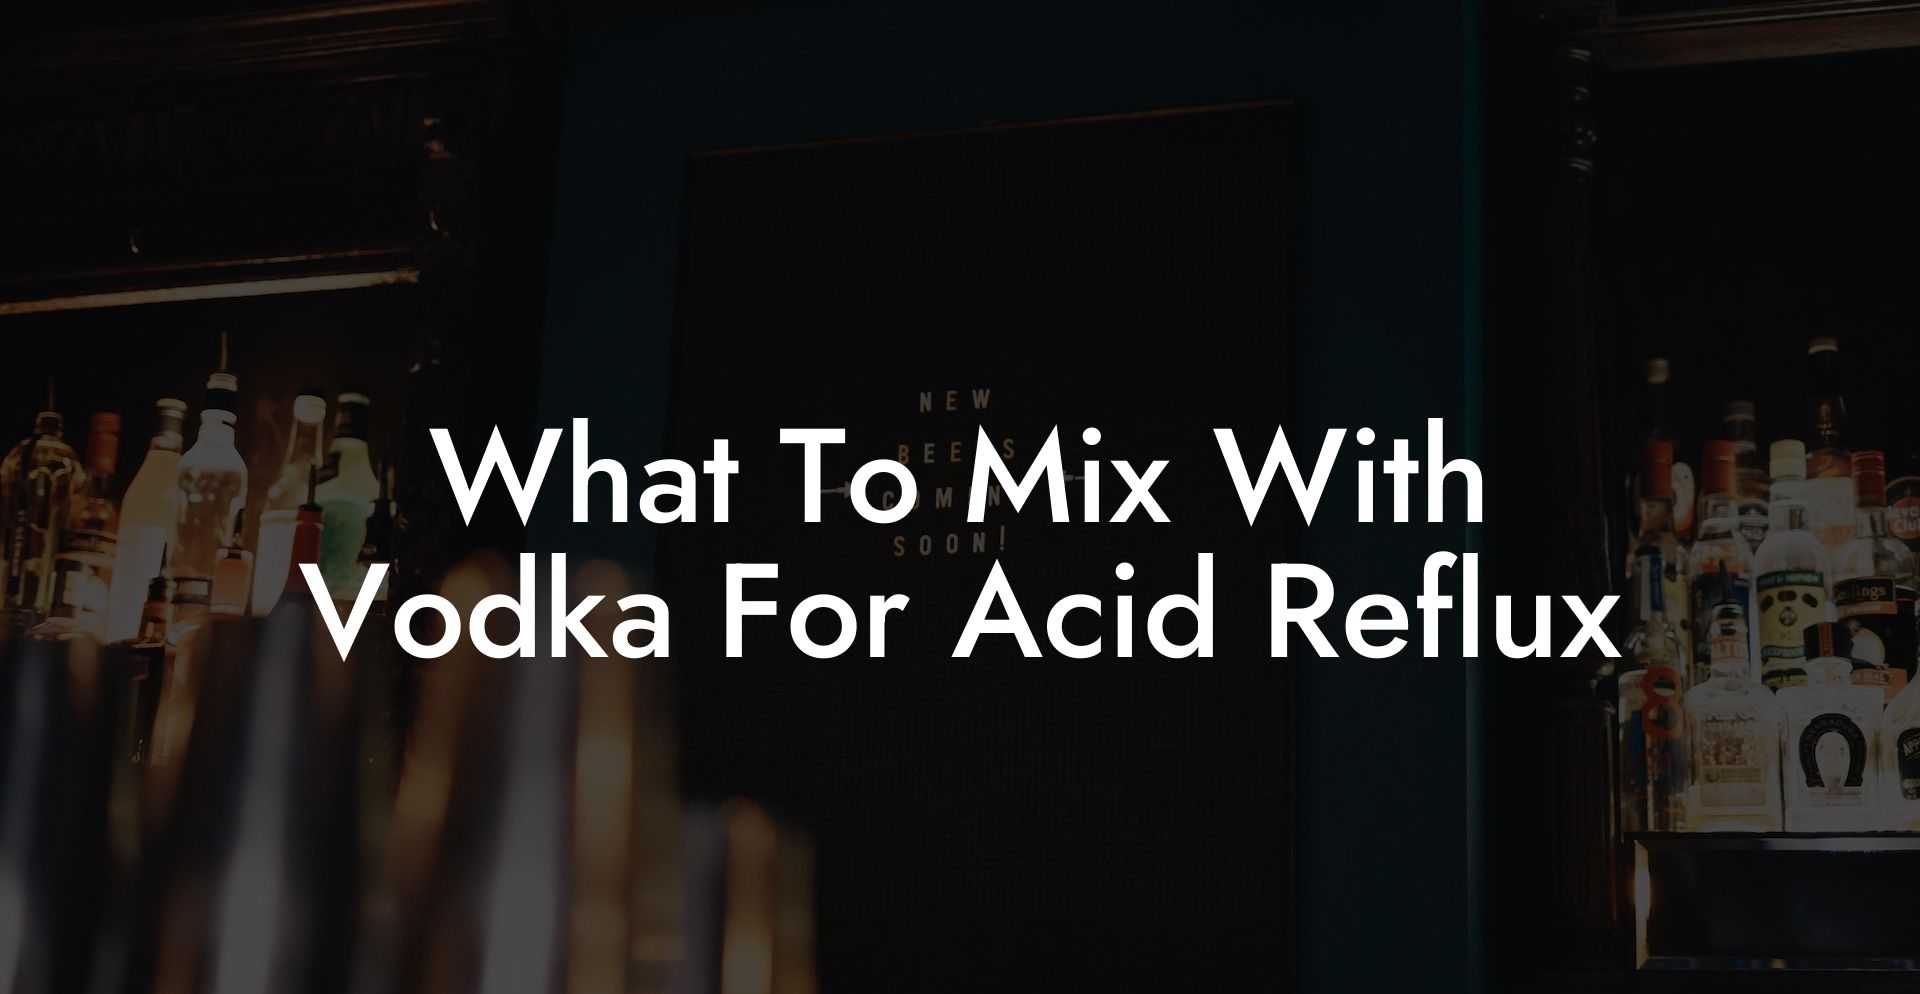 What To Mix With Vodka For Acid Reflux